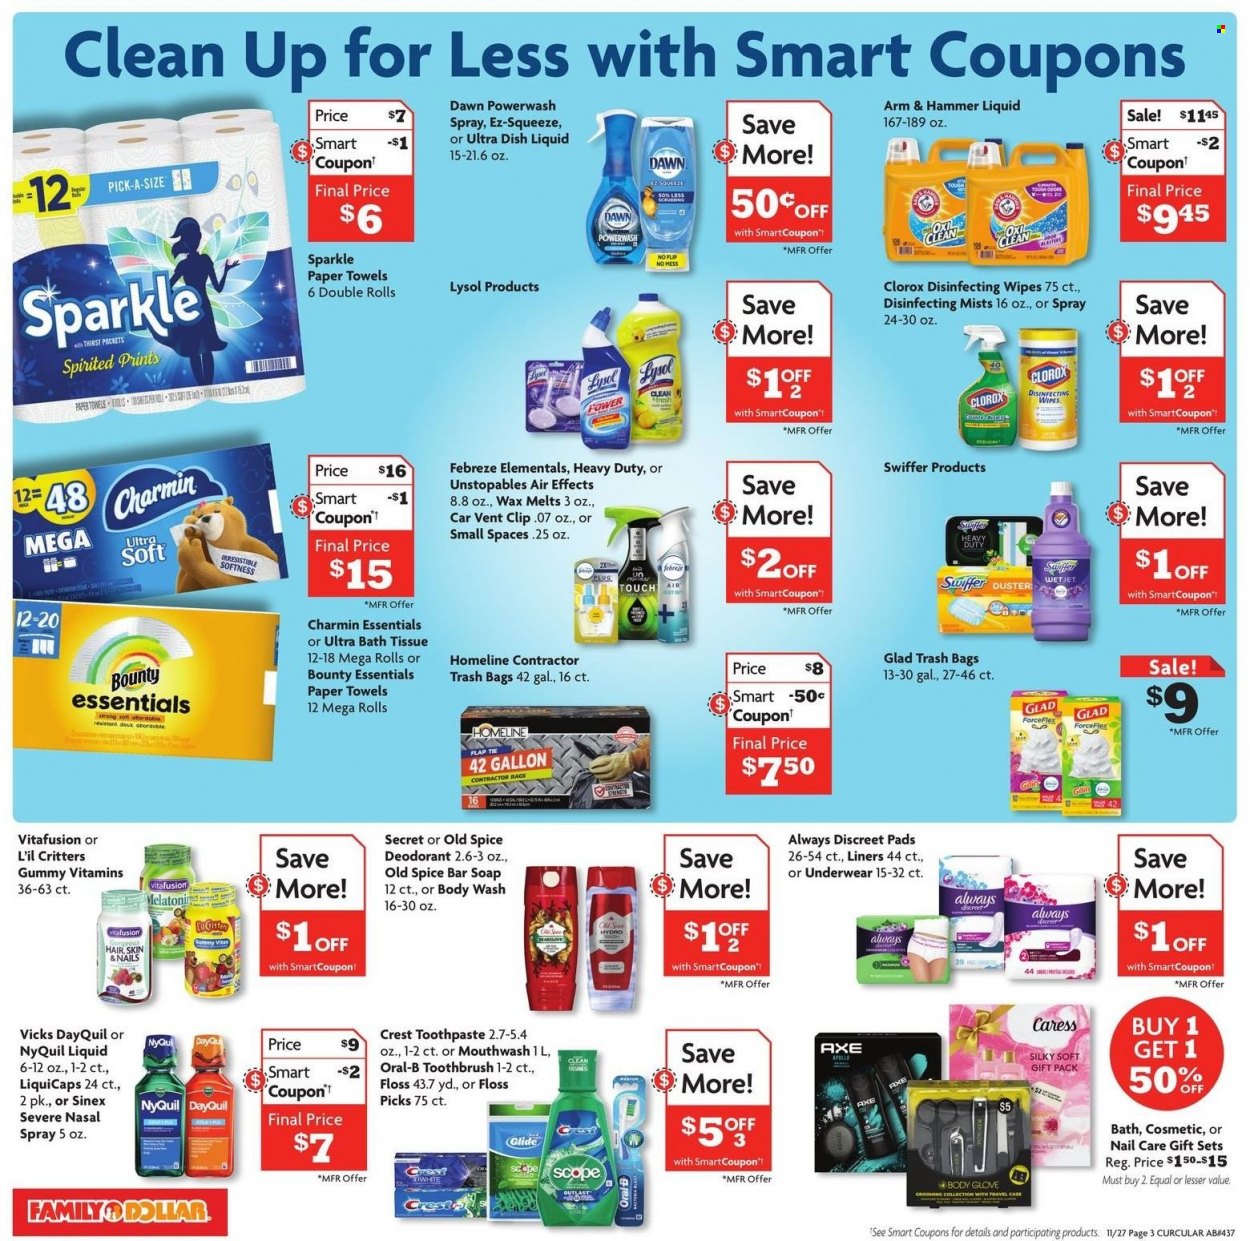 thumbnail - Family Dollar Flyer - 11/27/2022 - 12/03/2022 - Sales products - Bounty, ARM & HAMMER, spice, wipes, bath tissue, kitchen towels, paper towels, Charmin, Febreze, Gain, Lysol, Clorox, Swiffer, Unstopables, dishwashing liquid, body wash, Old Spice, soap bar, soap, toothbrush, Oral-B, toothpaste, mouthwash, Crest, sanitary pads, Always Discreet, anti-perspirant, deodorant, Axe, Vicks, trash bags, gallon, duster, WetJet, DayQuil, Vitafusion, NyQuil, nasal spray, Sinex. Page 12.